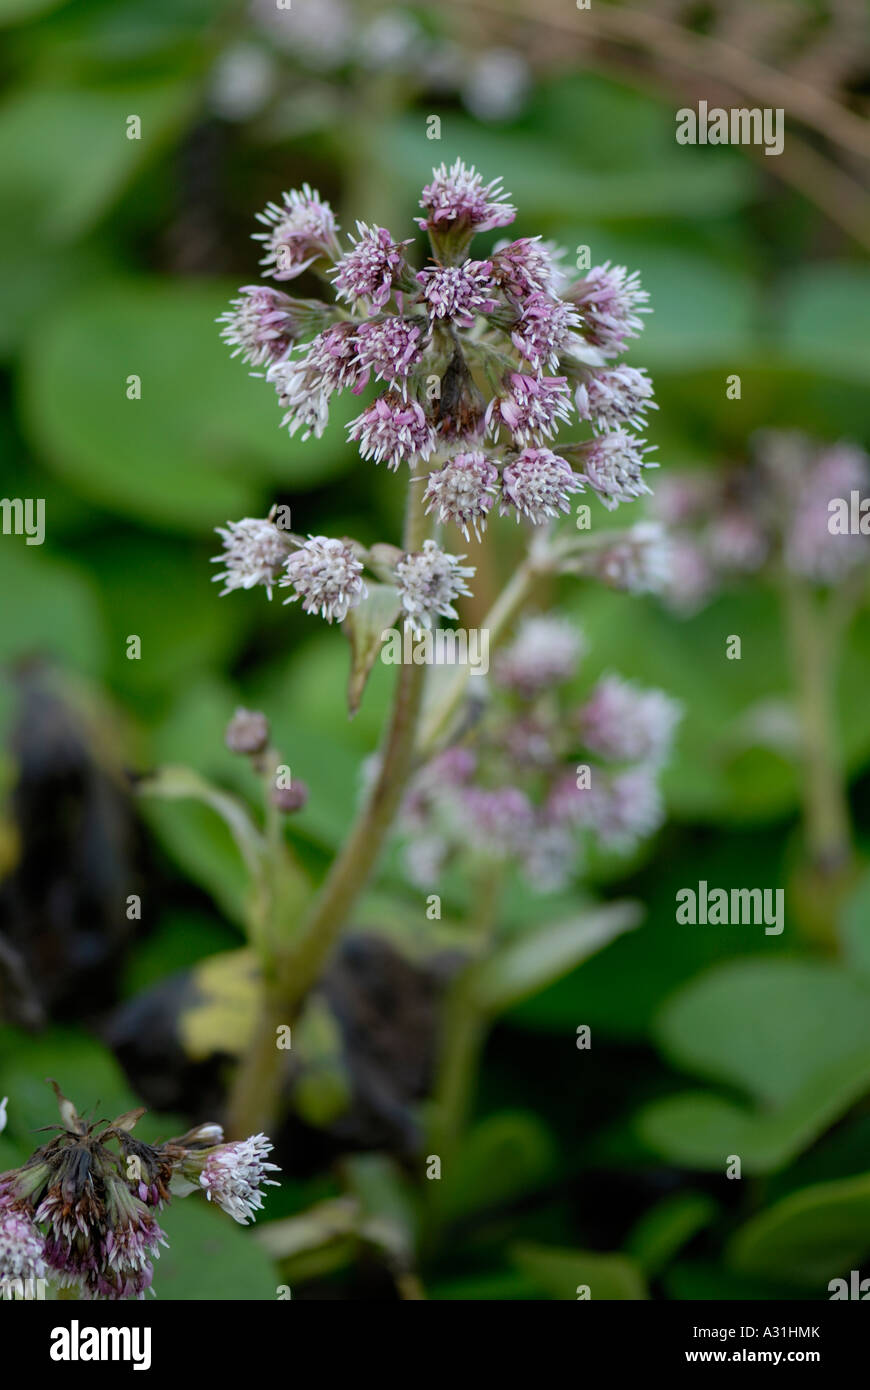 Racemes flower heads of the lilac vanilla scented flowers of the winter flowering Winter Heliotrope Petasites fragrans Stock Photo